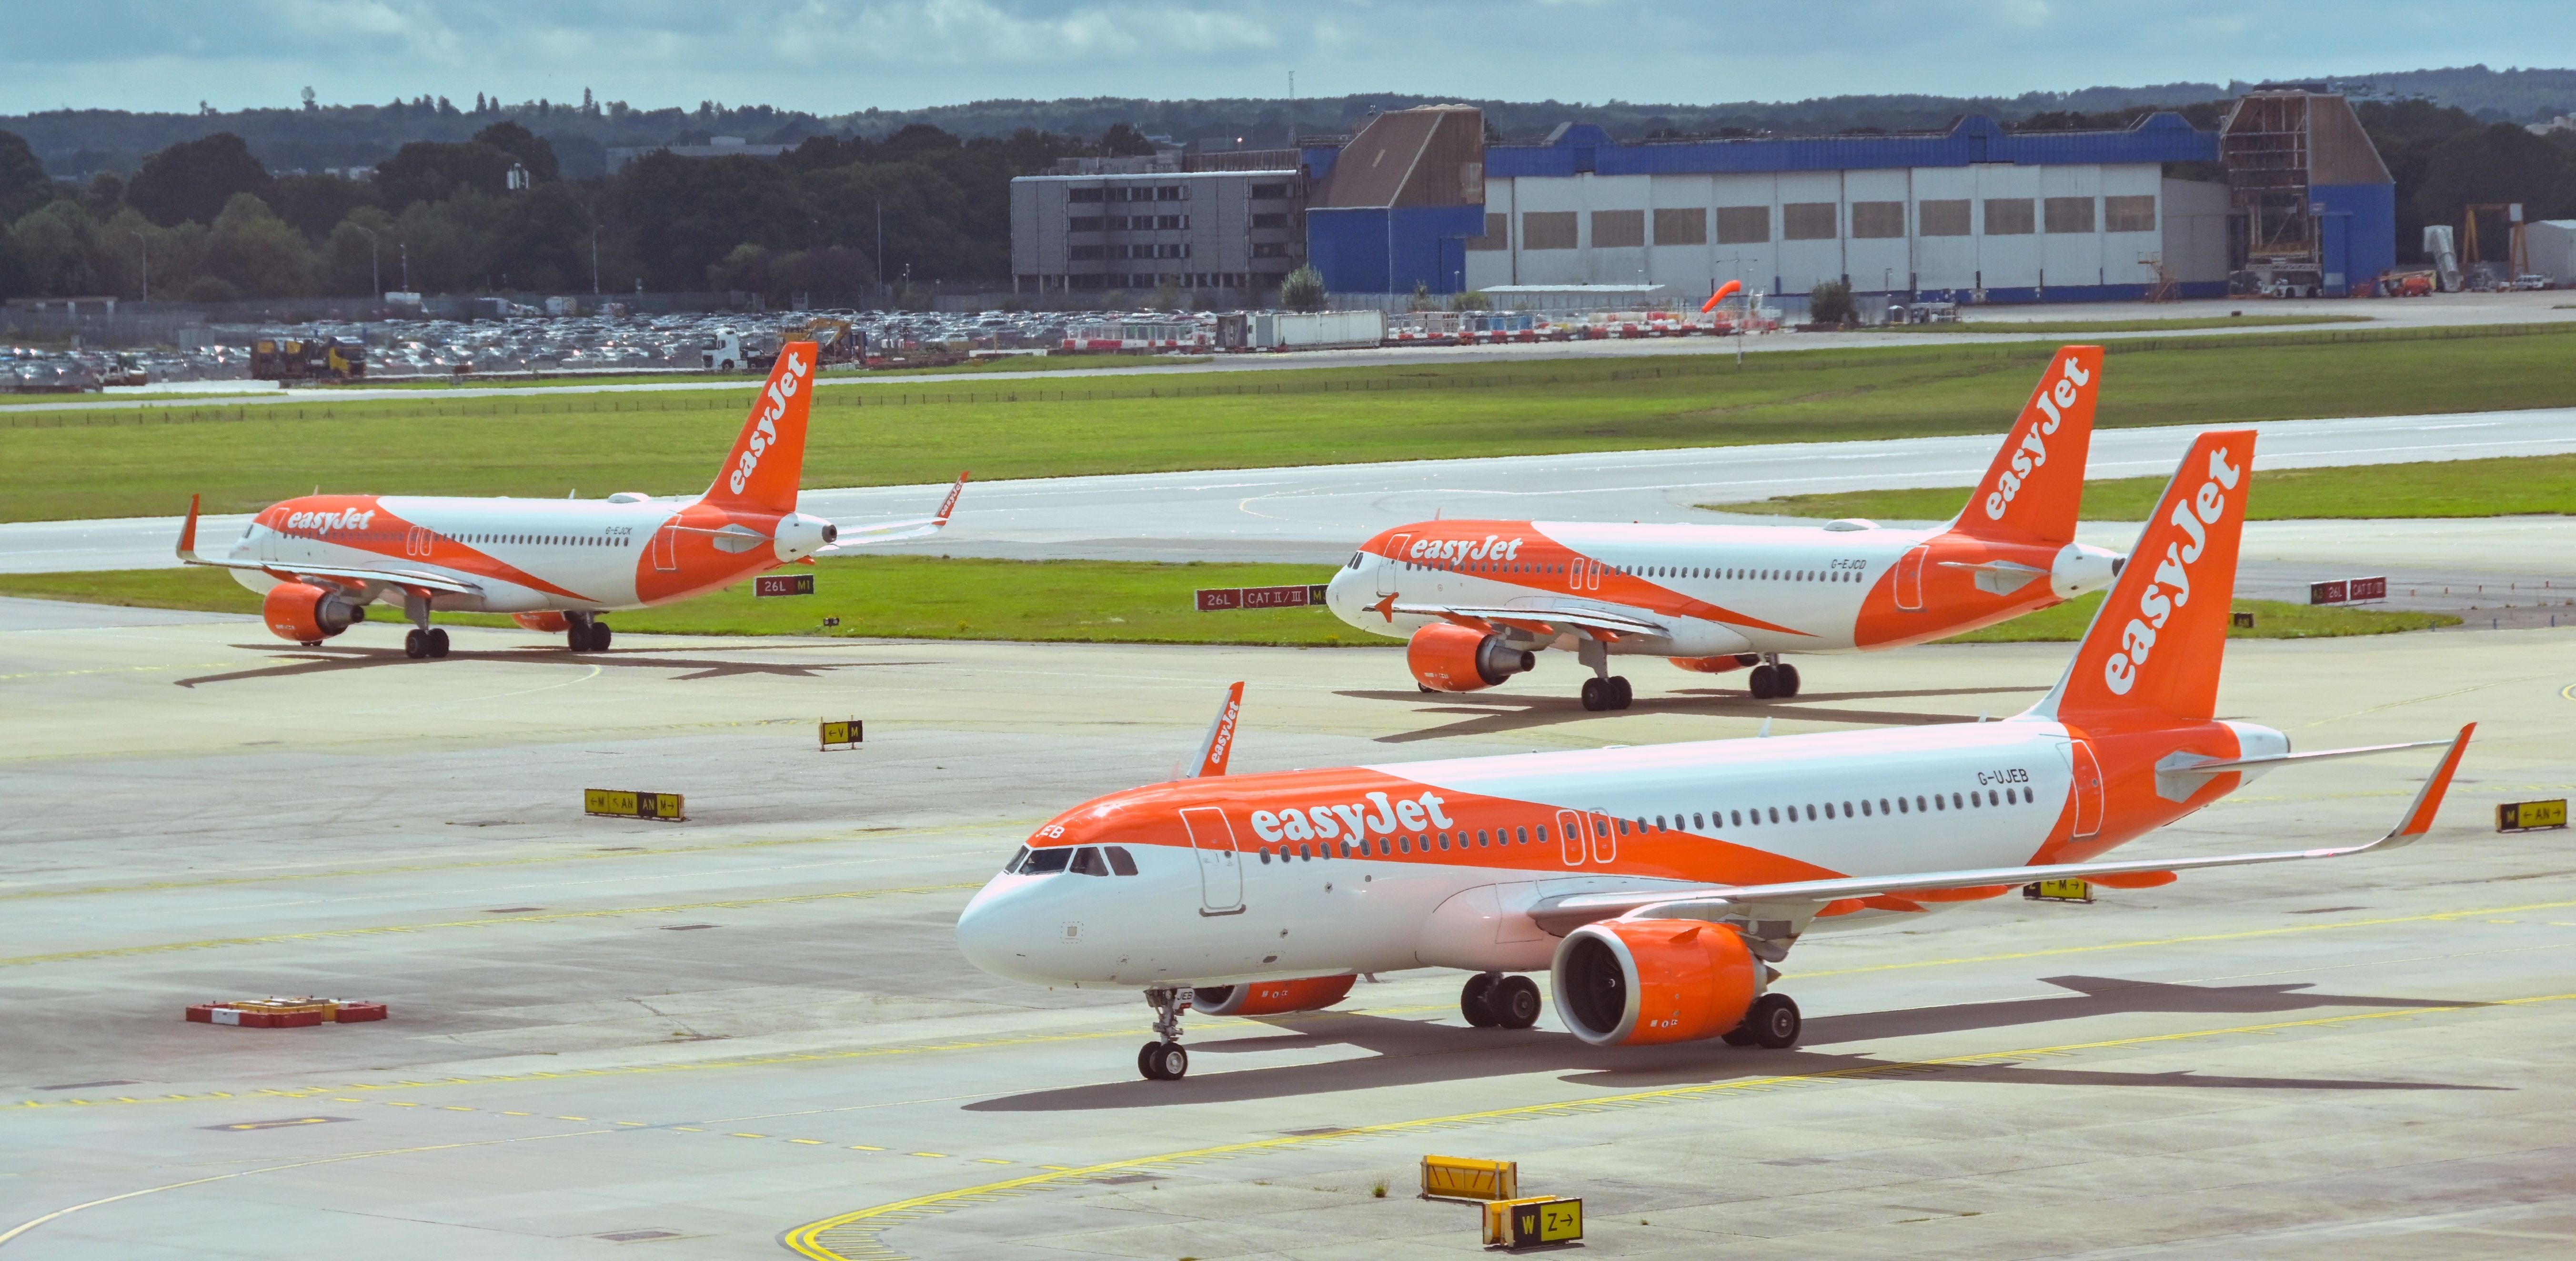 Several easyJet Planes On The Ground At London Gatwick Airport.